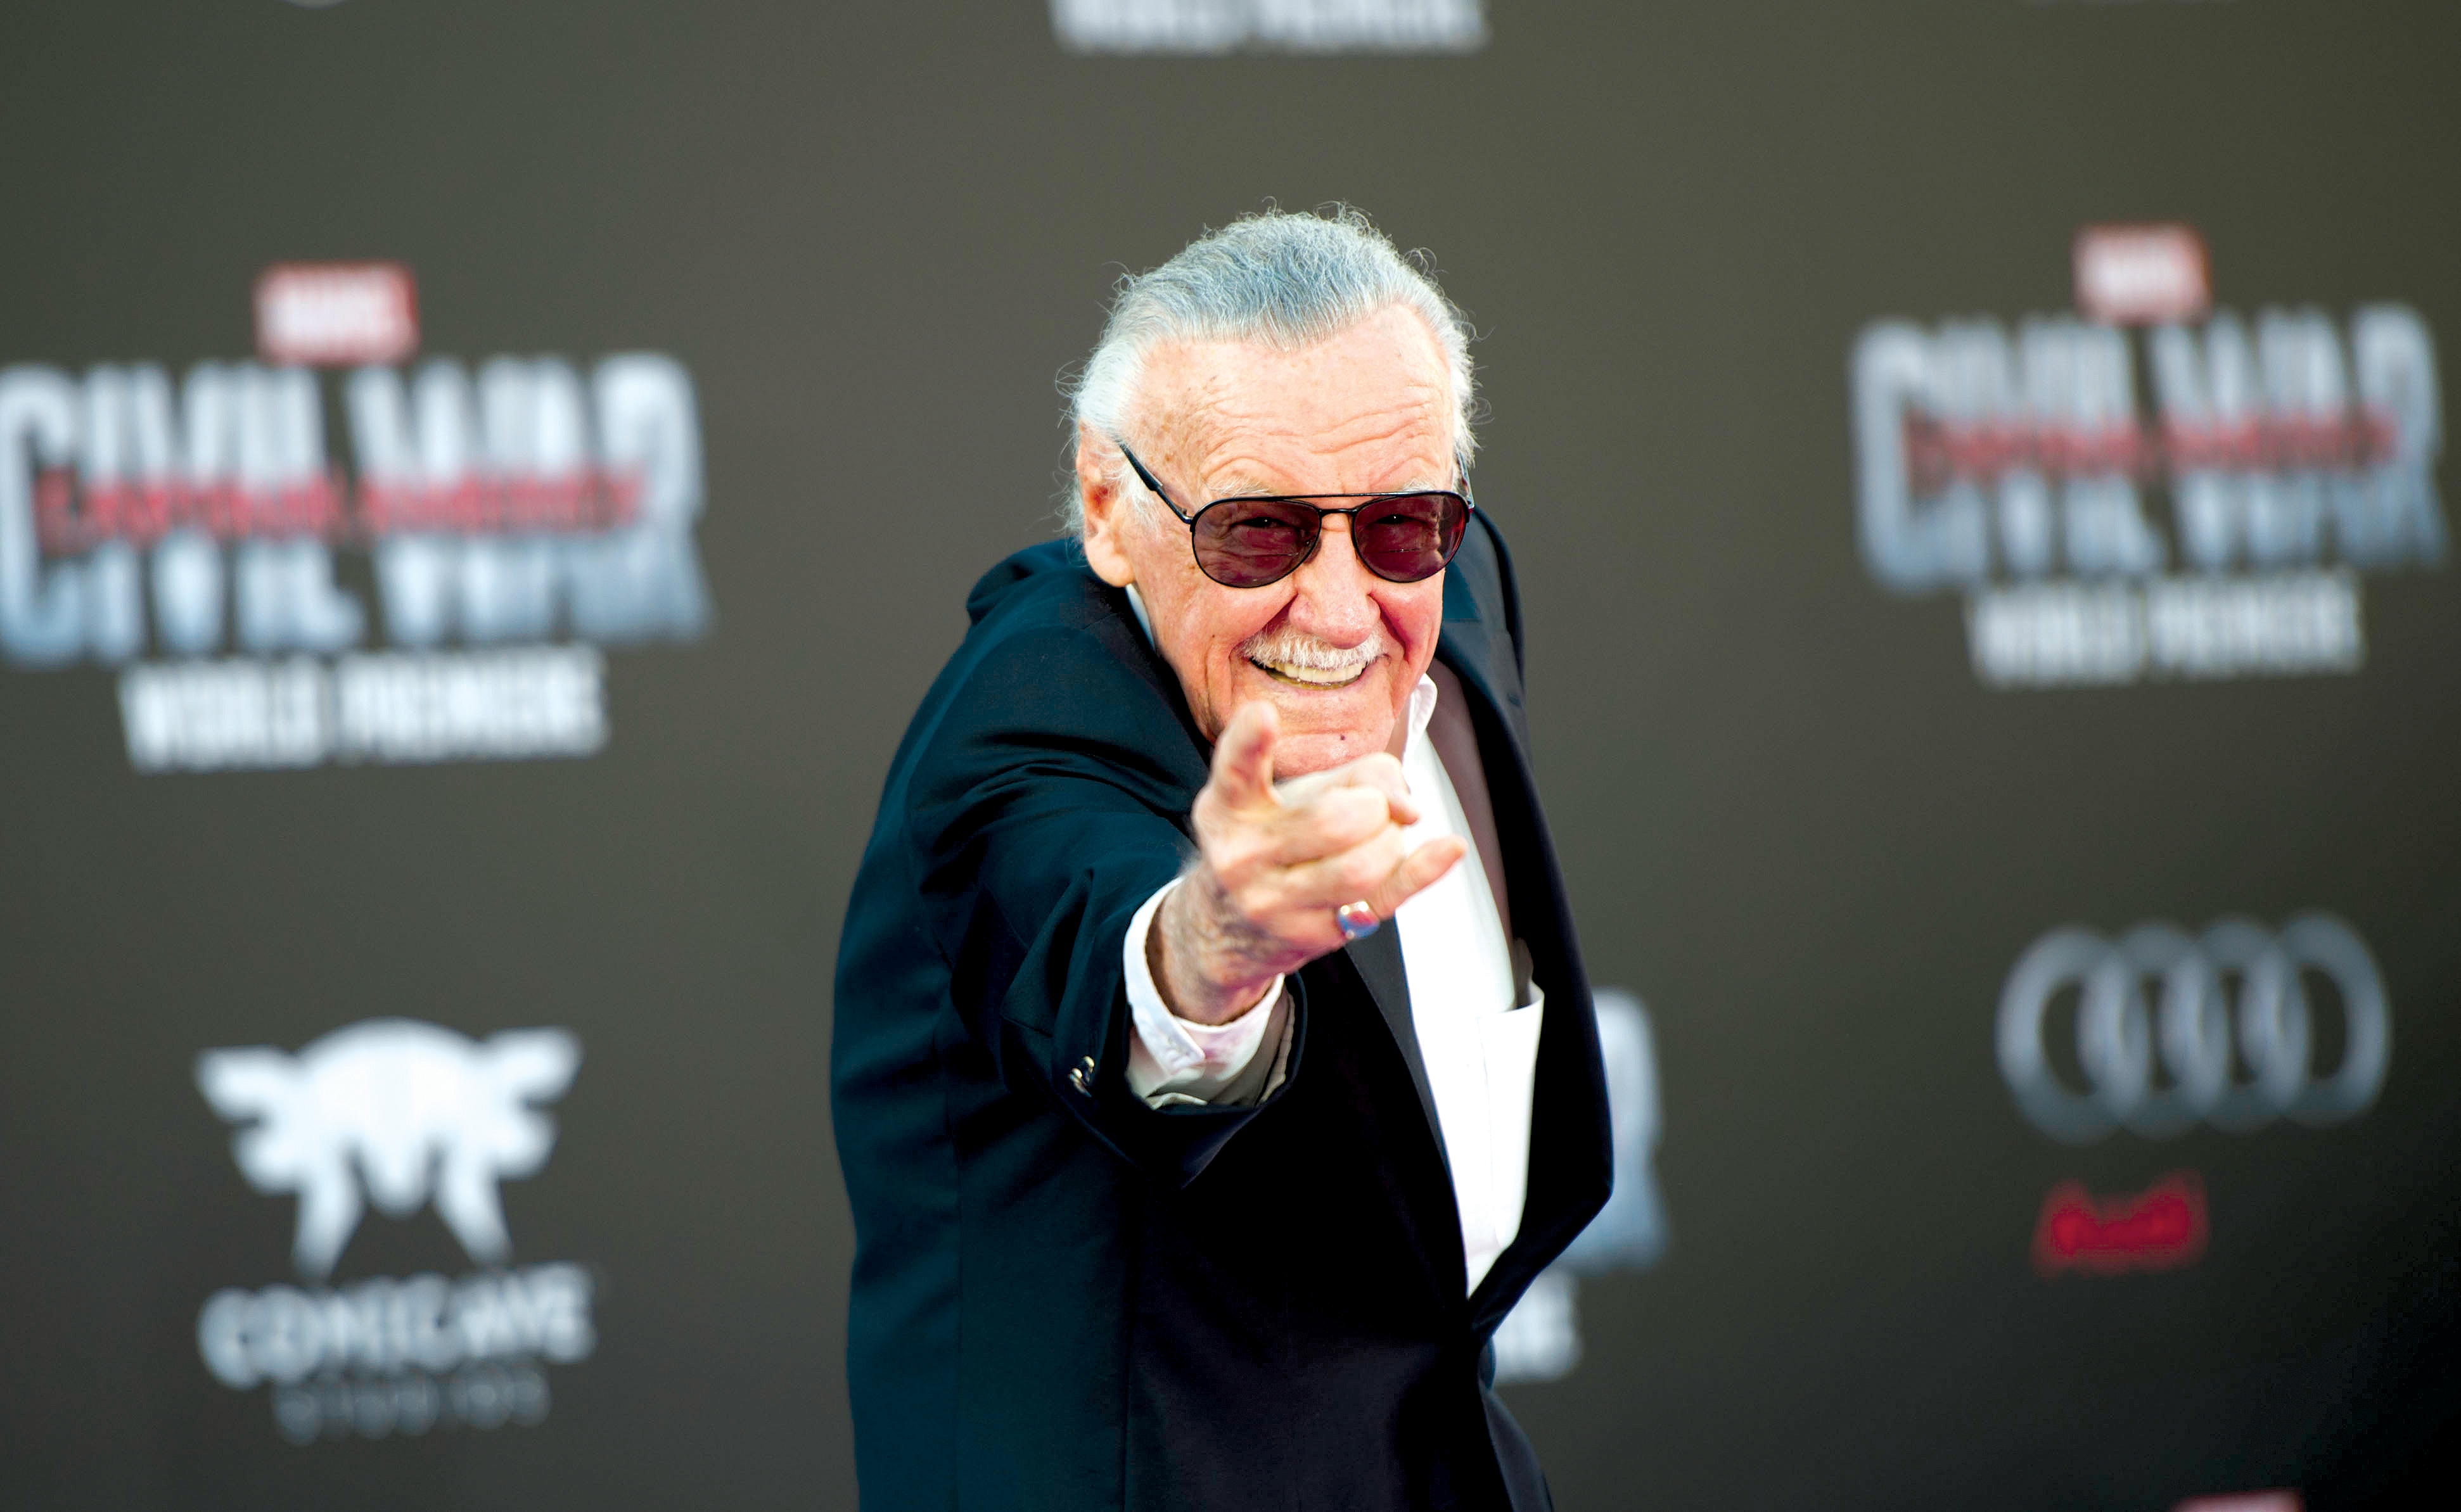 THE ERA OF EXCELSIOR